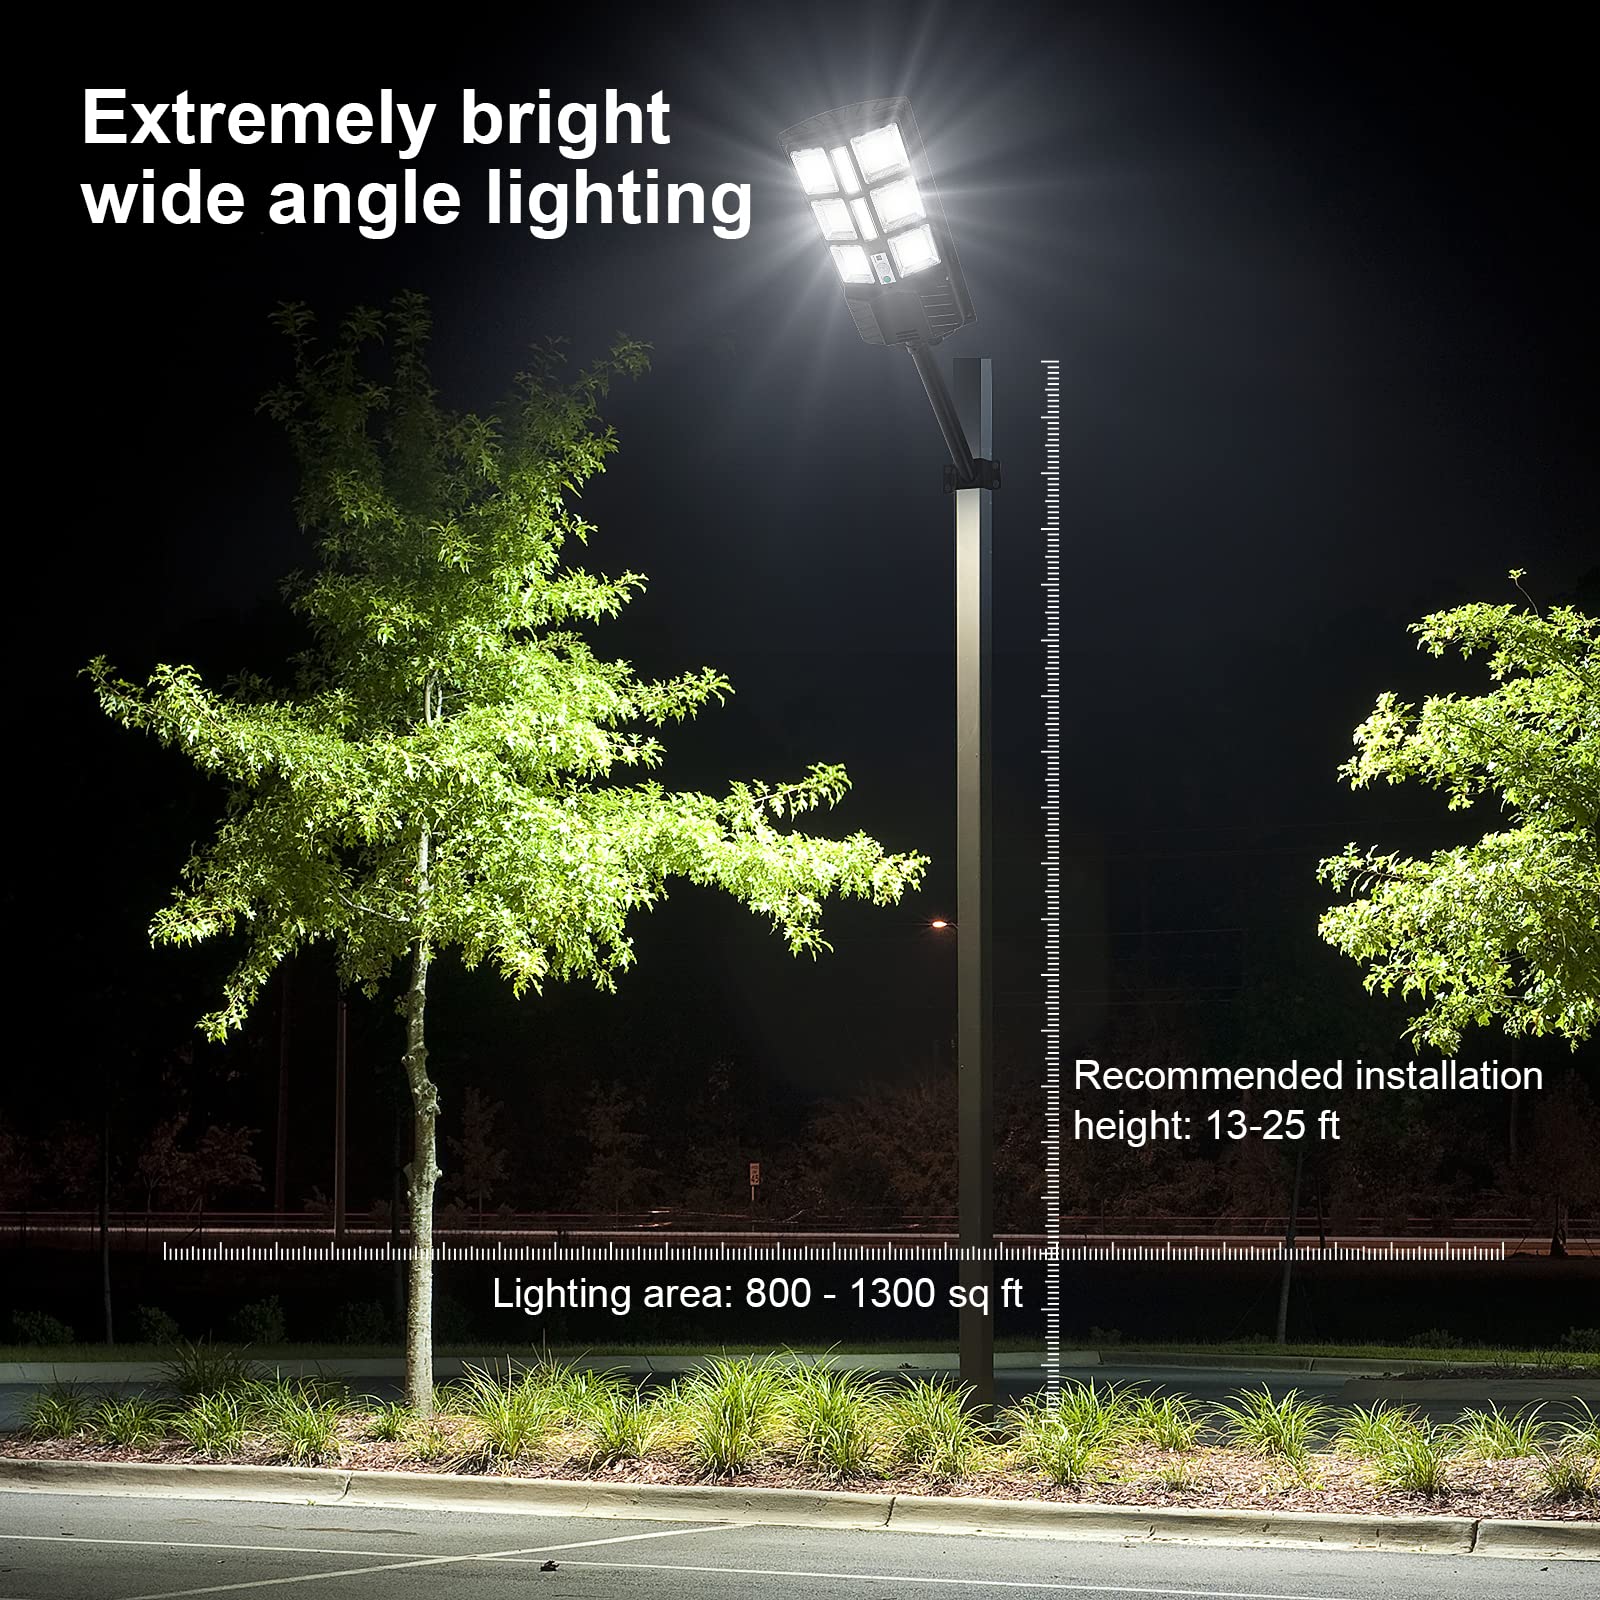 Buy Take Solar Street Lights Outdoor Waterproof Solar Light 1000W Dusk  to Dawn Solar Parking Lot Lights,Security Flood Lights with Motion Sensor  Control for Yard, Path, Garage,Home, Commercial Grade